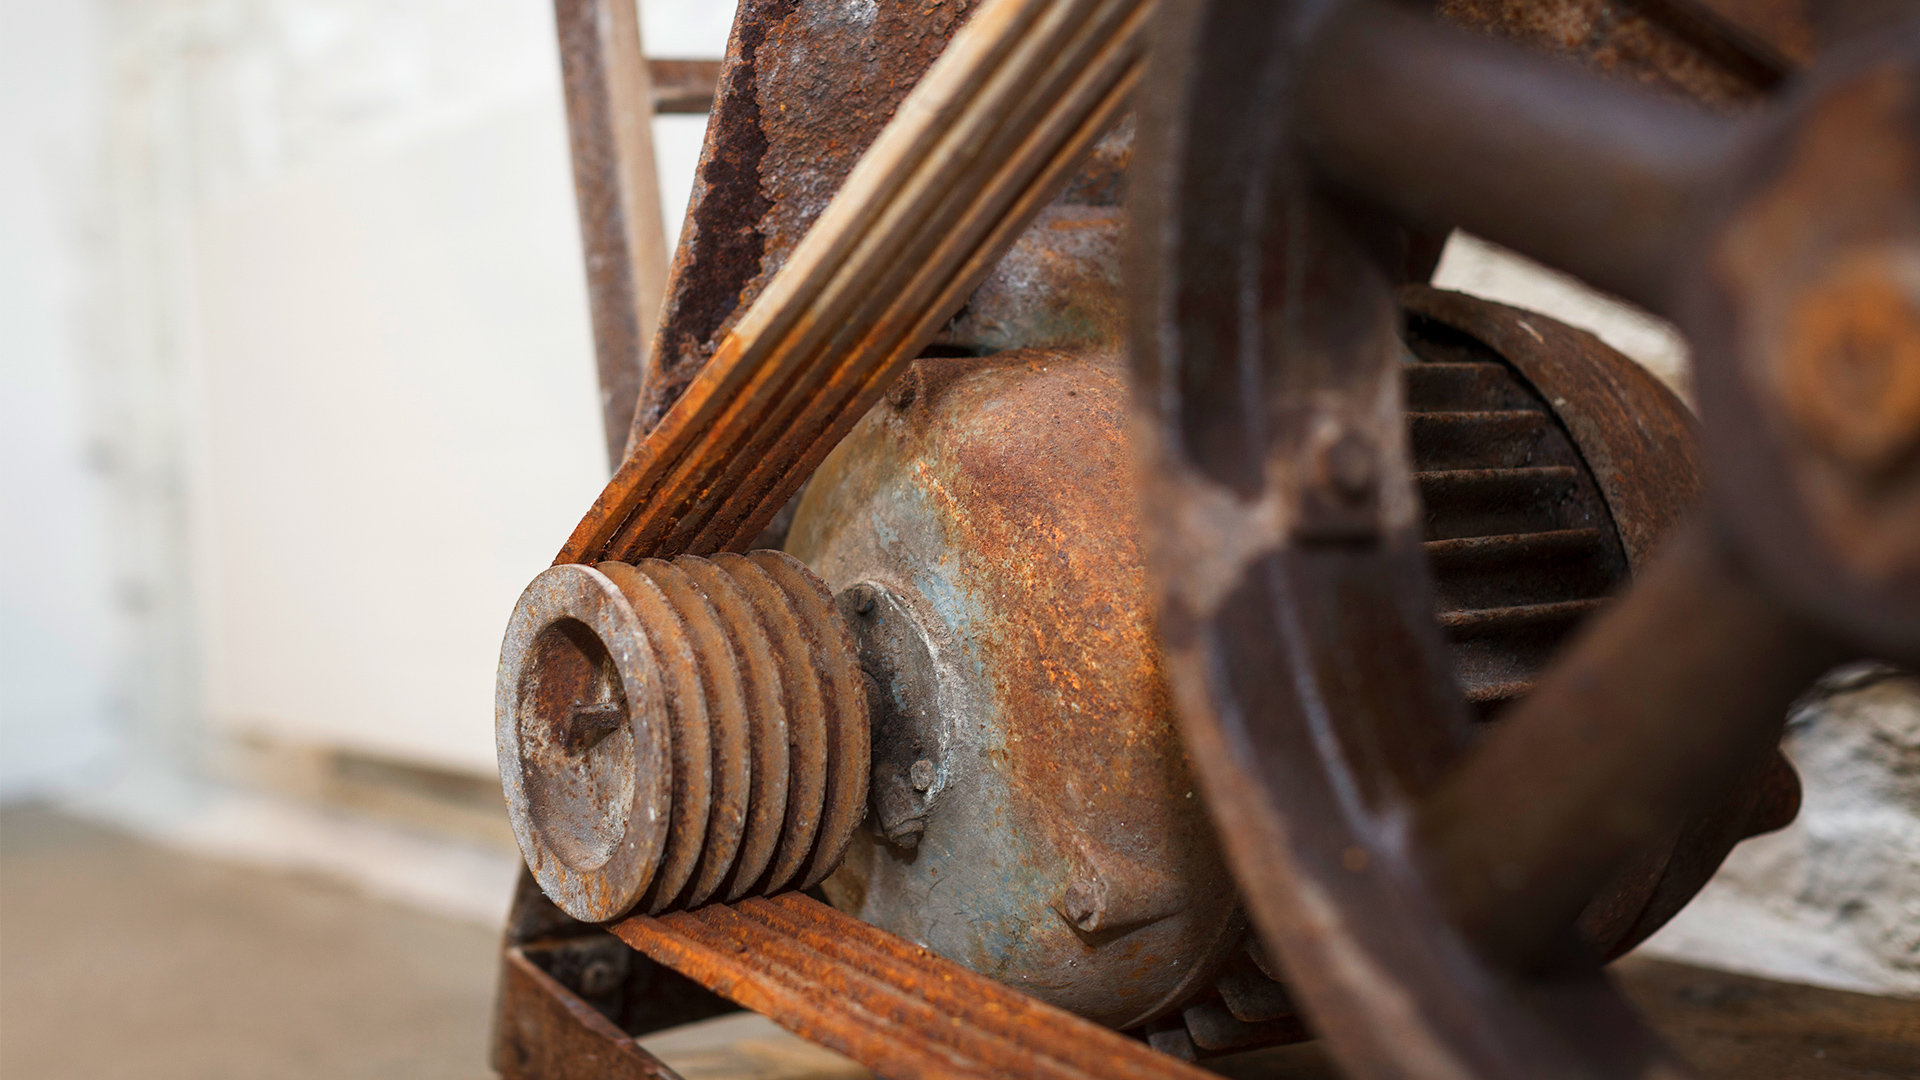 A close-up of the cogs and wheels of old machinery from the building's industrial past